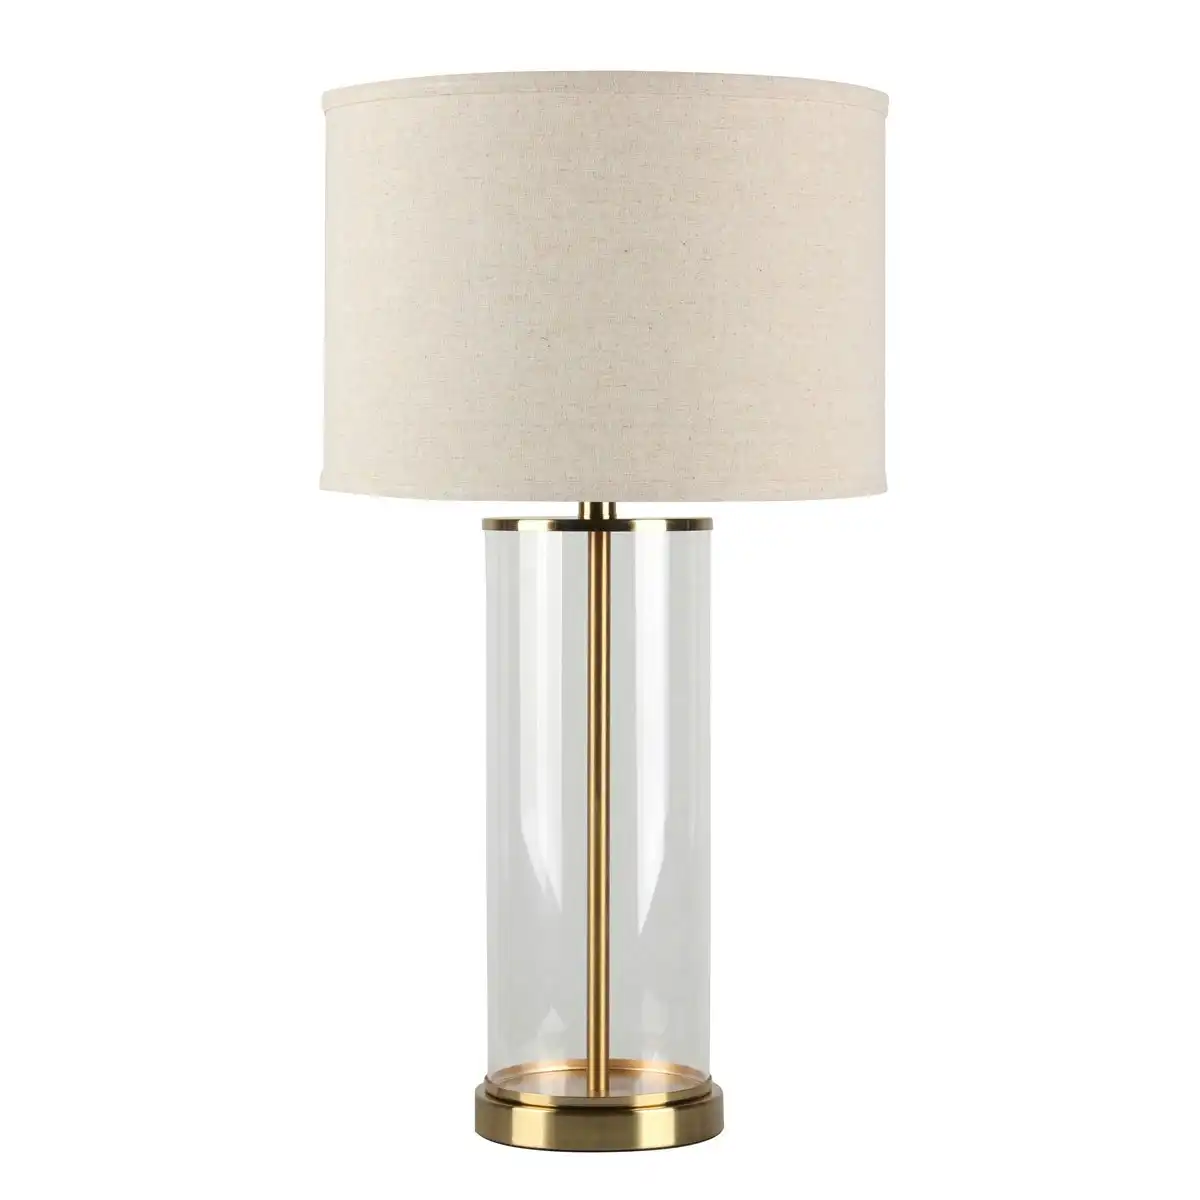 Cafe Lighting Left Bank Table Lamp - Brass with Natural Shade